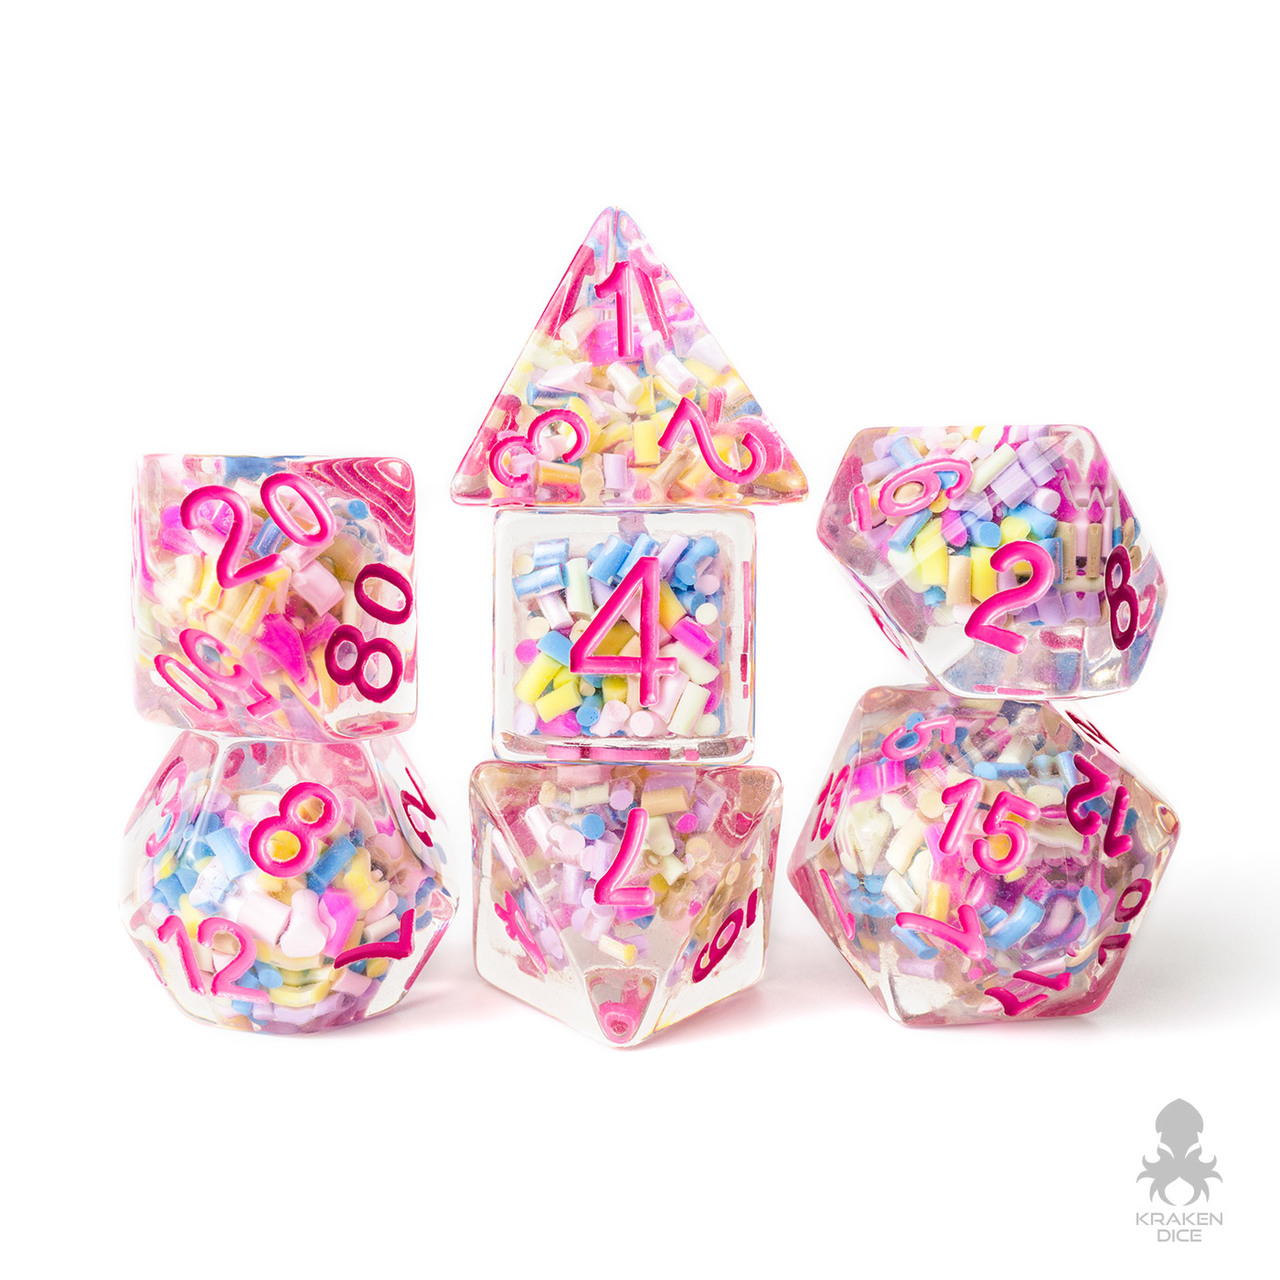 DND dice that are transparent with sprinkles inside.